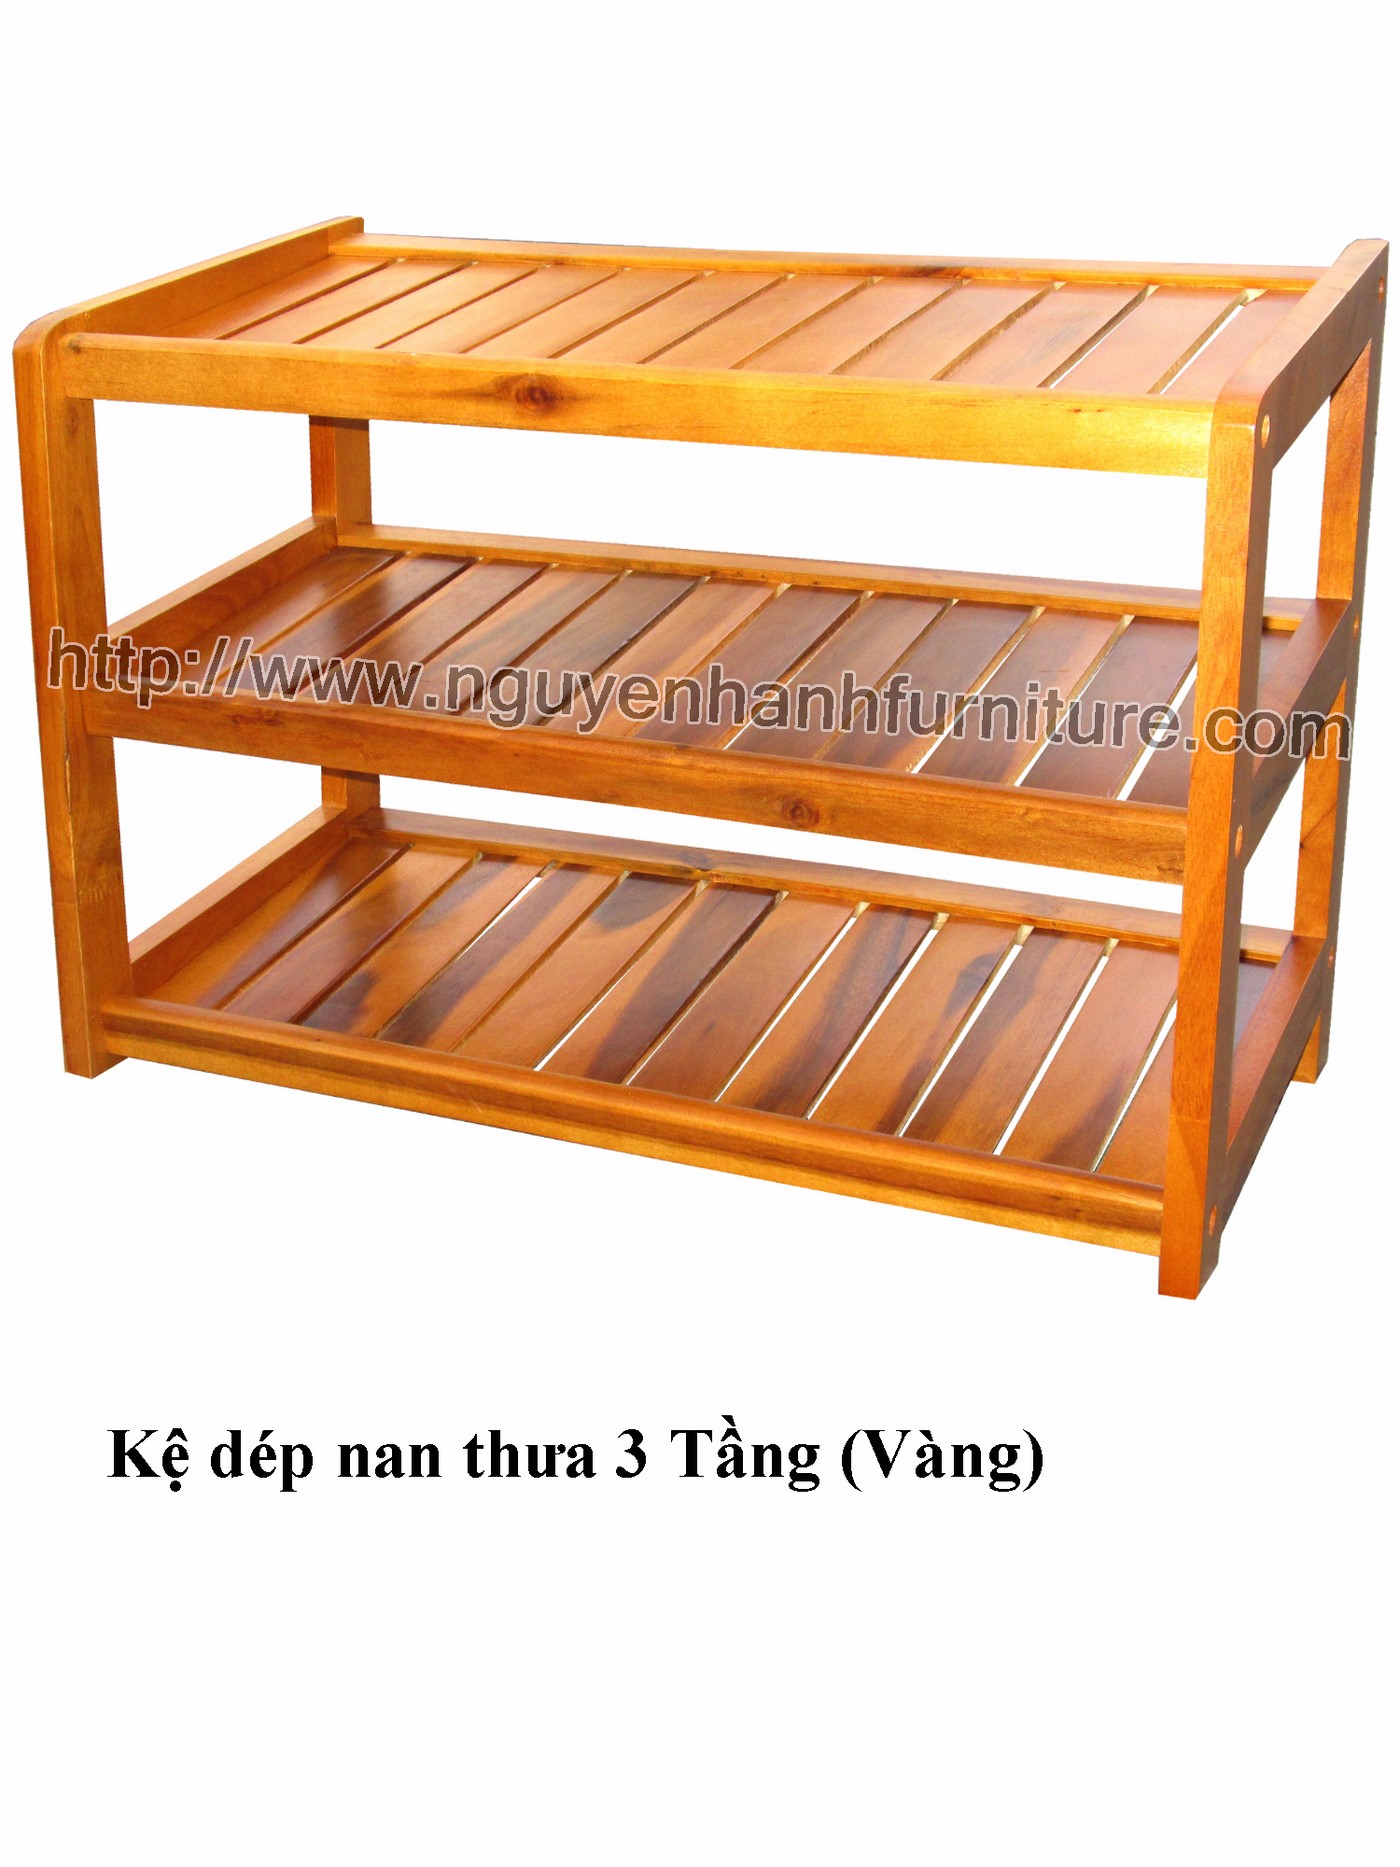 Name product: 3 storey Shoeshelf wth sparse blades (Yellow) - Dimensions: 62 x 30 x 45 (H) - Description: Wood natural rubber